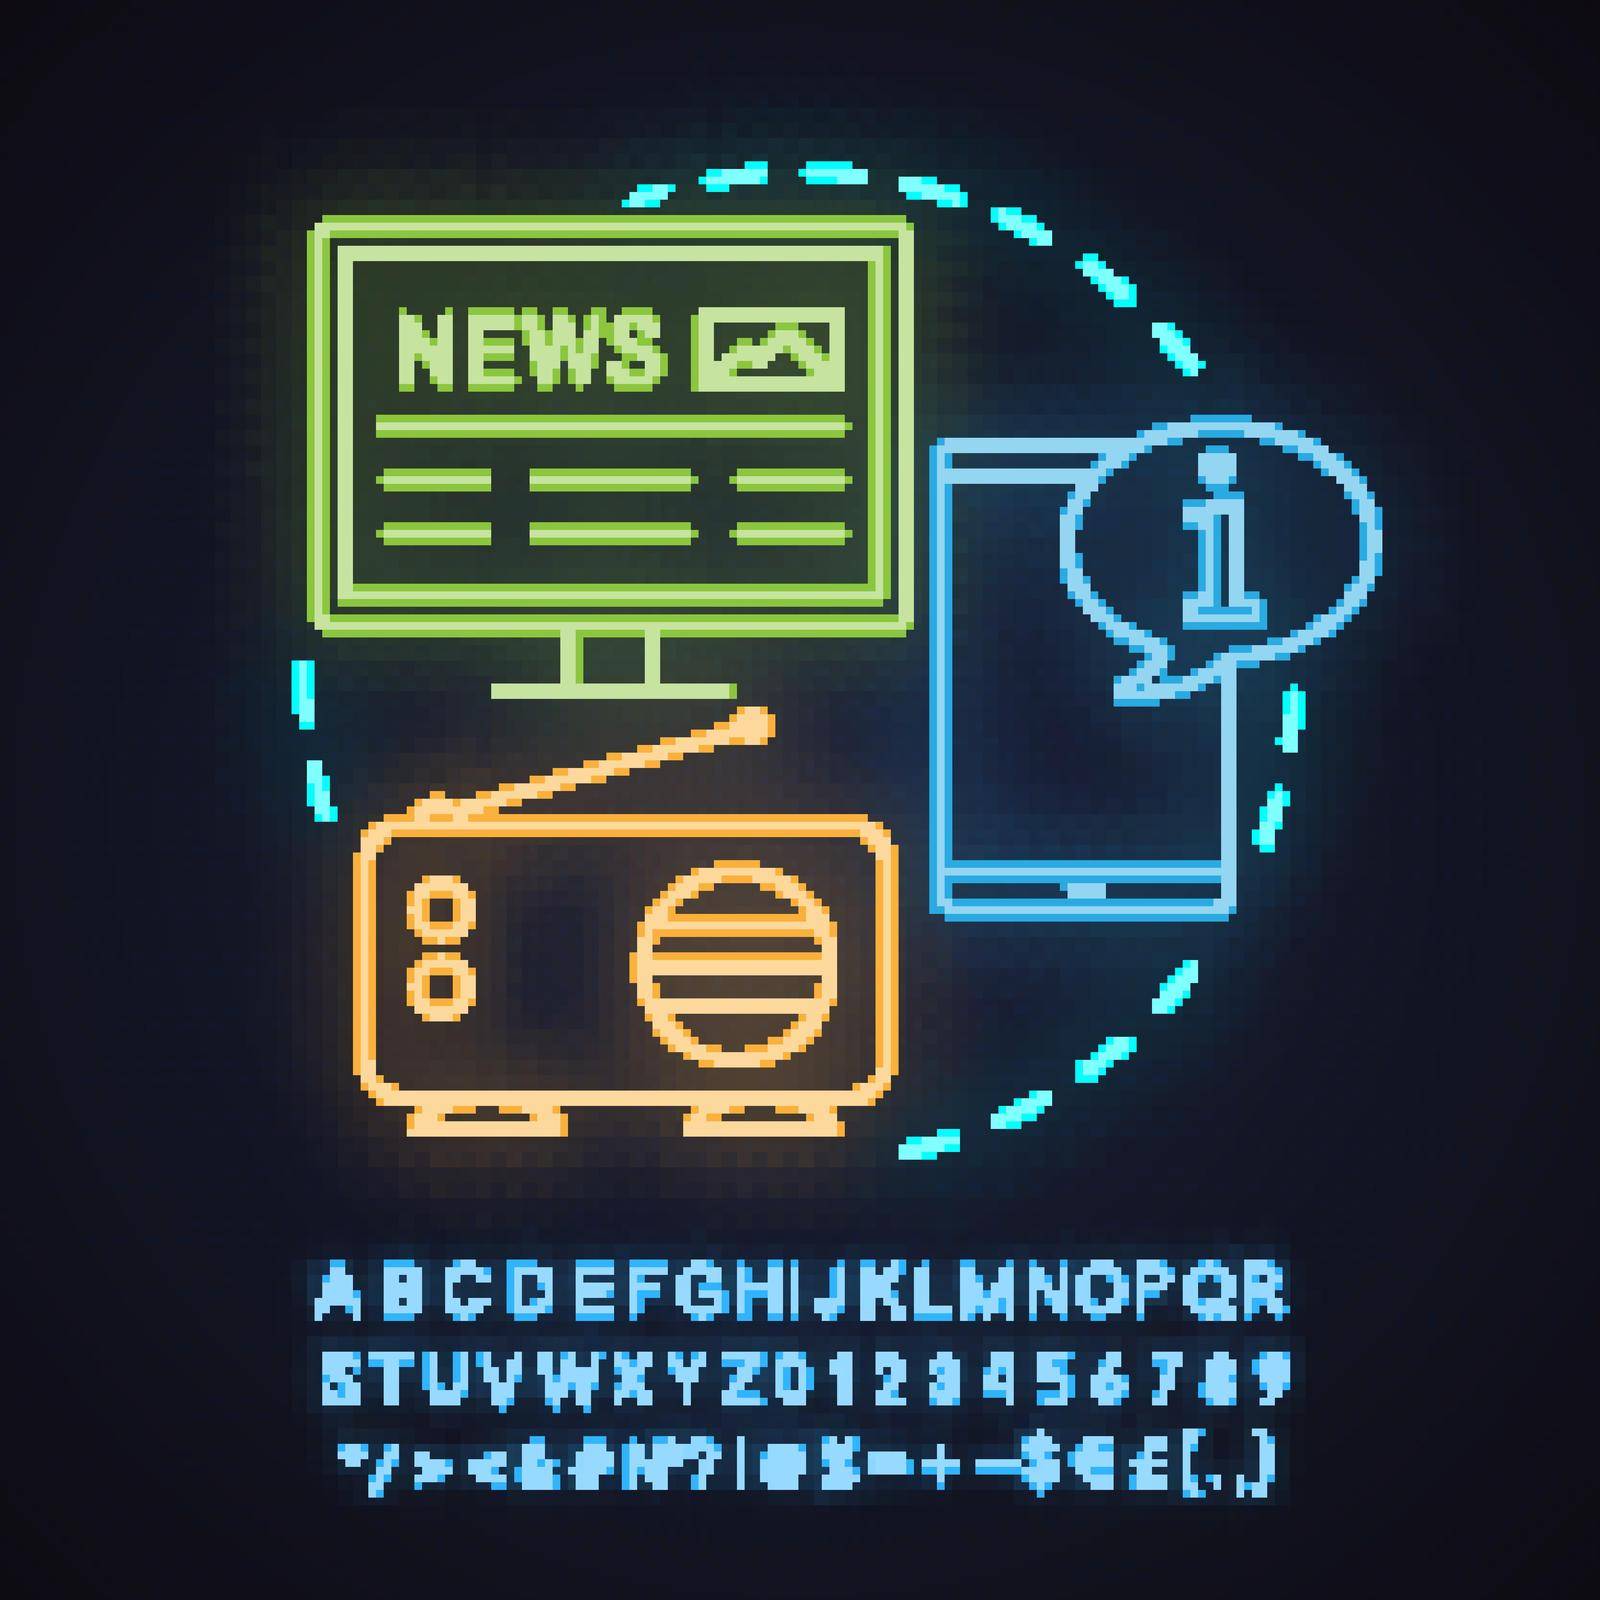 News studio neon light concept icon. Mass media idea. Electronic newspaper, radio broadcasting, info chat. Glowing sign with alphabet, numbers and symbols. Vector isolated illustration